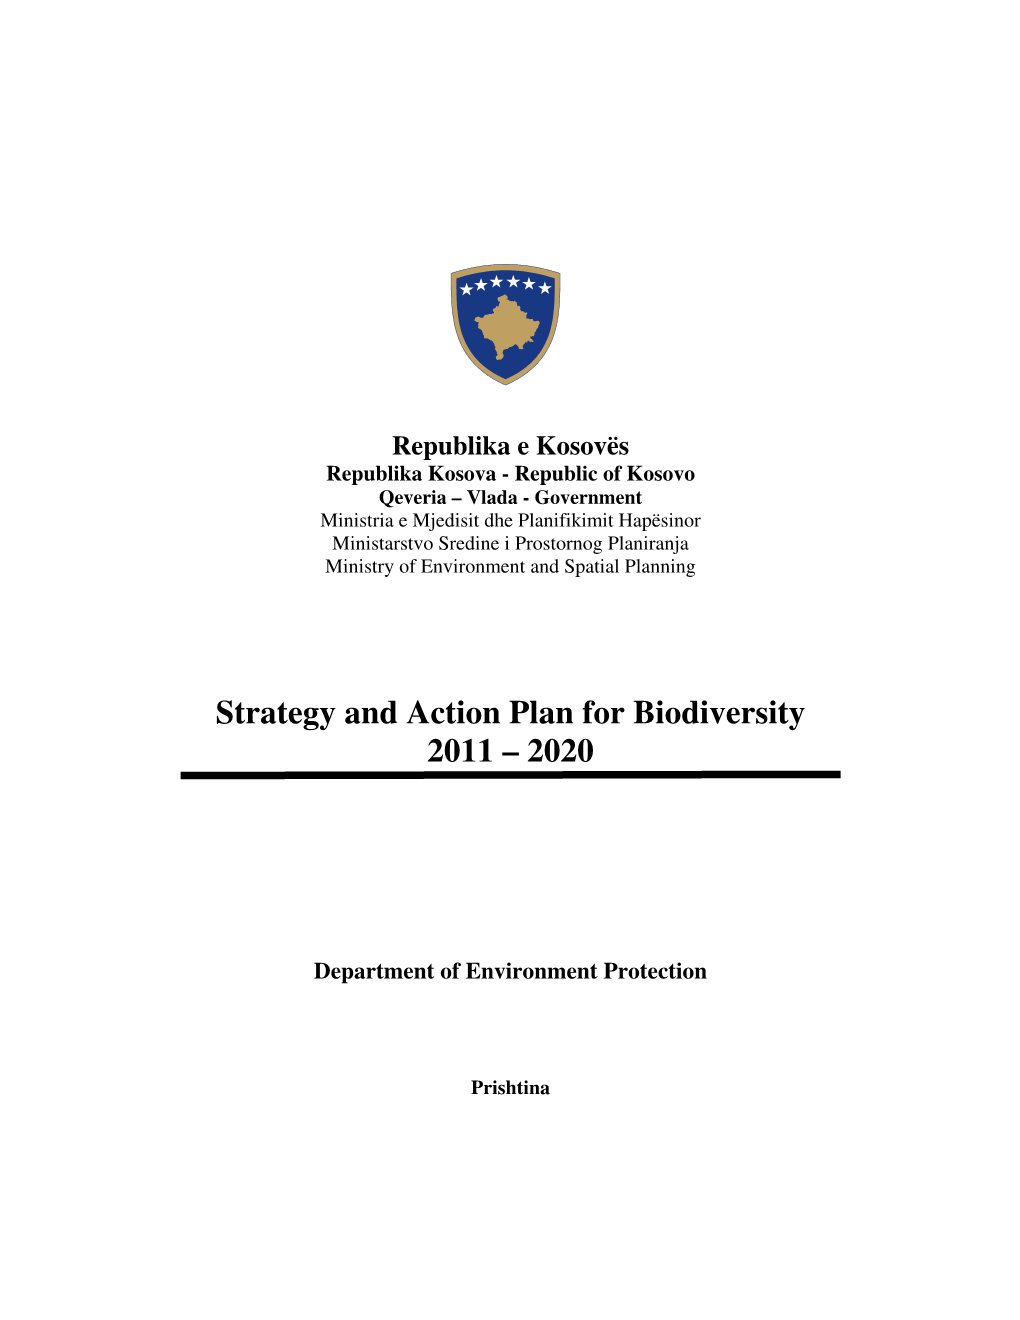 Strategy and Action Plan for Biodiversity 2011 – 2020